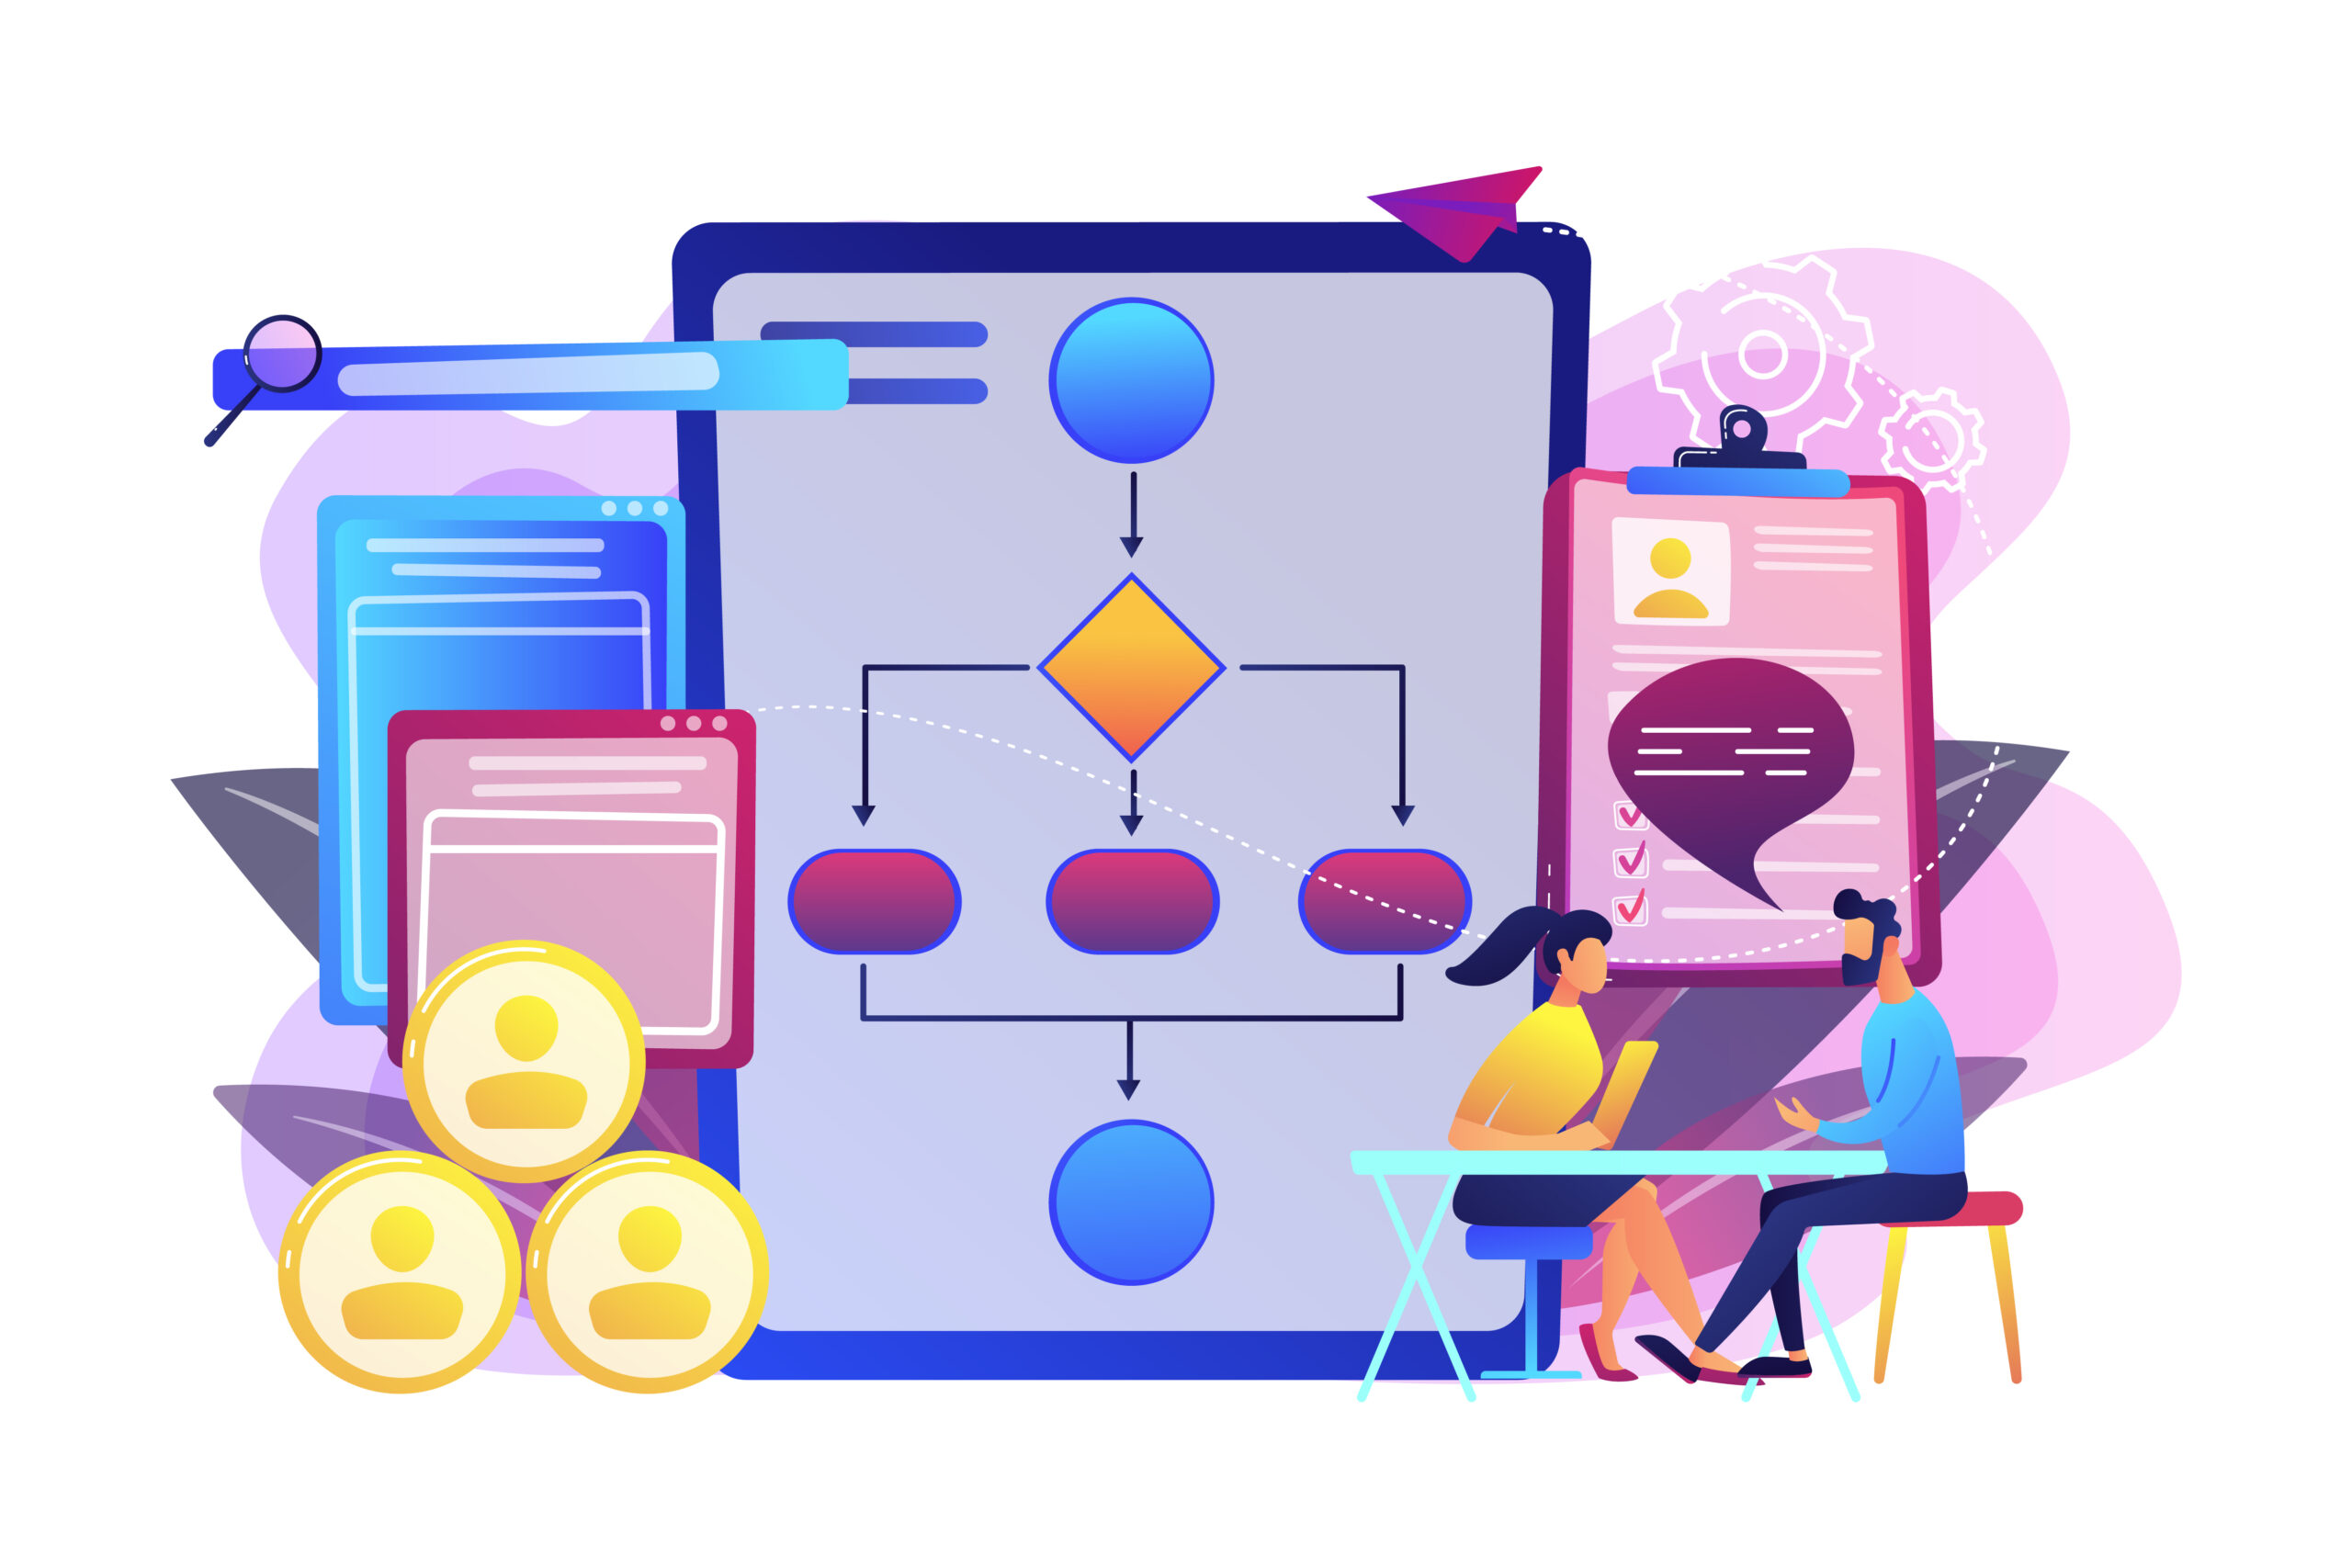 HR manager with employee at interview and business flow chart. Employee assessment software, HR company system, employee check programme concept. Bright vibrant violet vector isolated illustration